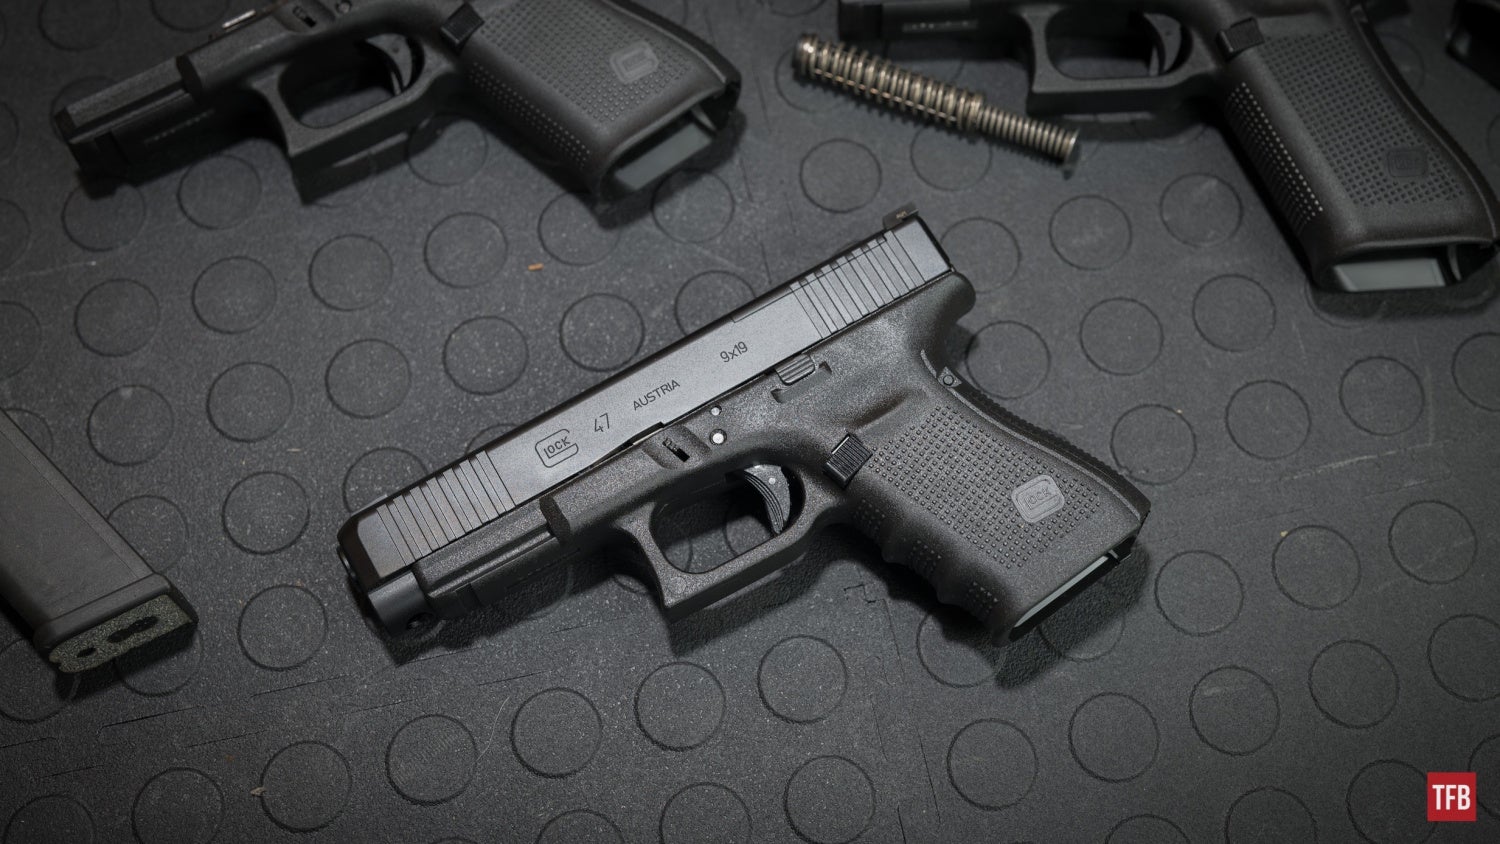 TFB Exclusive: The Elusive GLOCK 47 Clears Customs; Headed To LGS